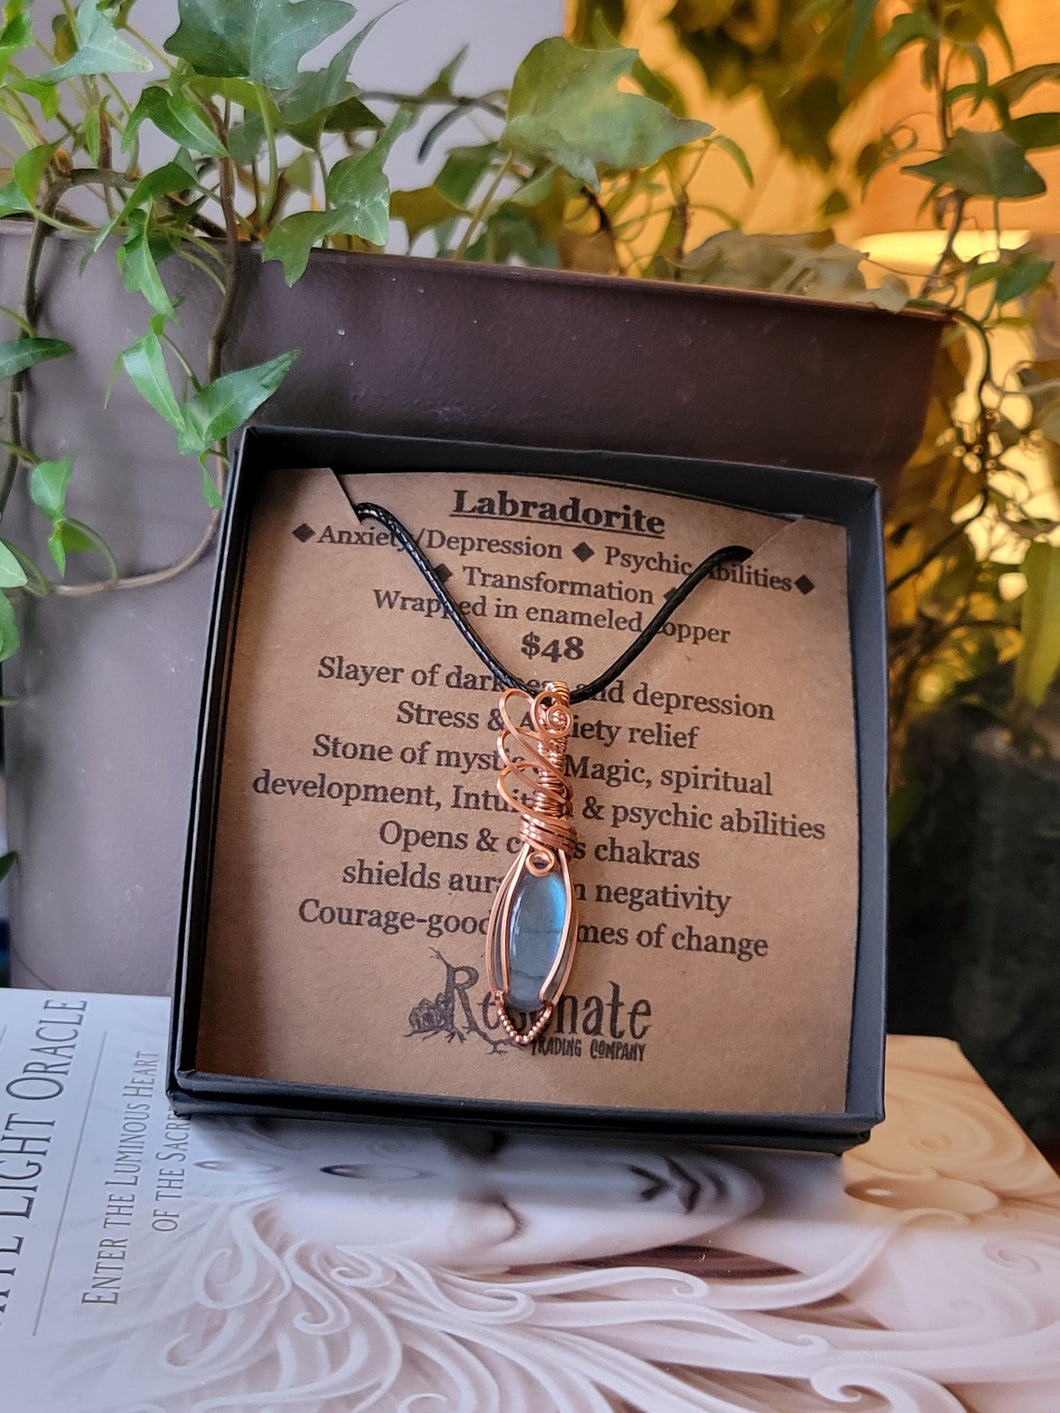 Labradorite Wire Wrapped in Enameled Copper